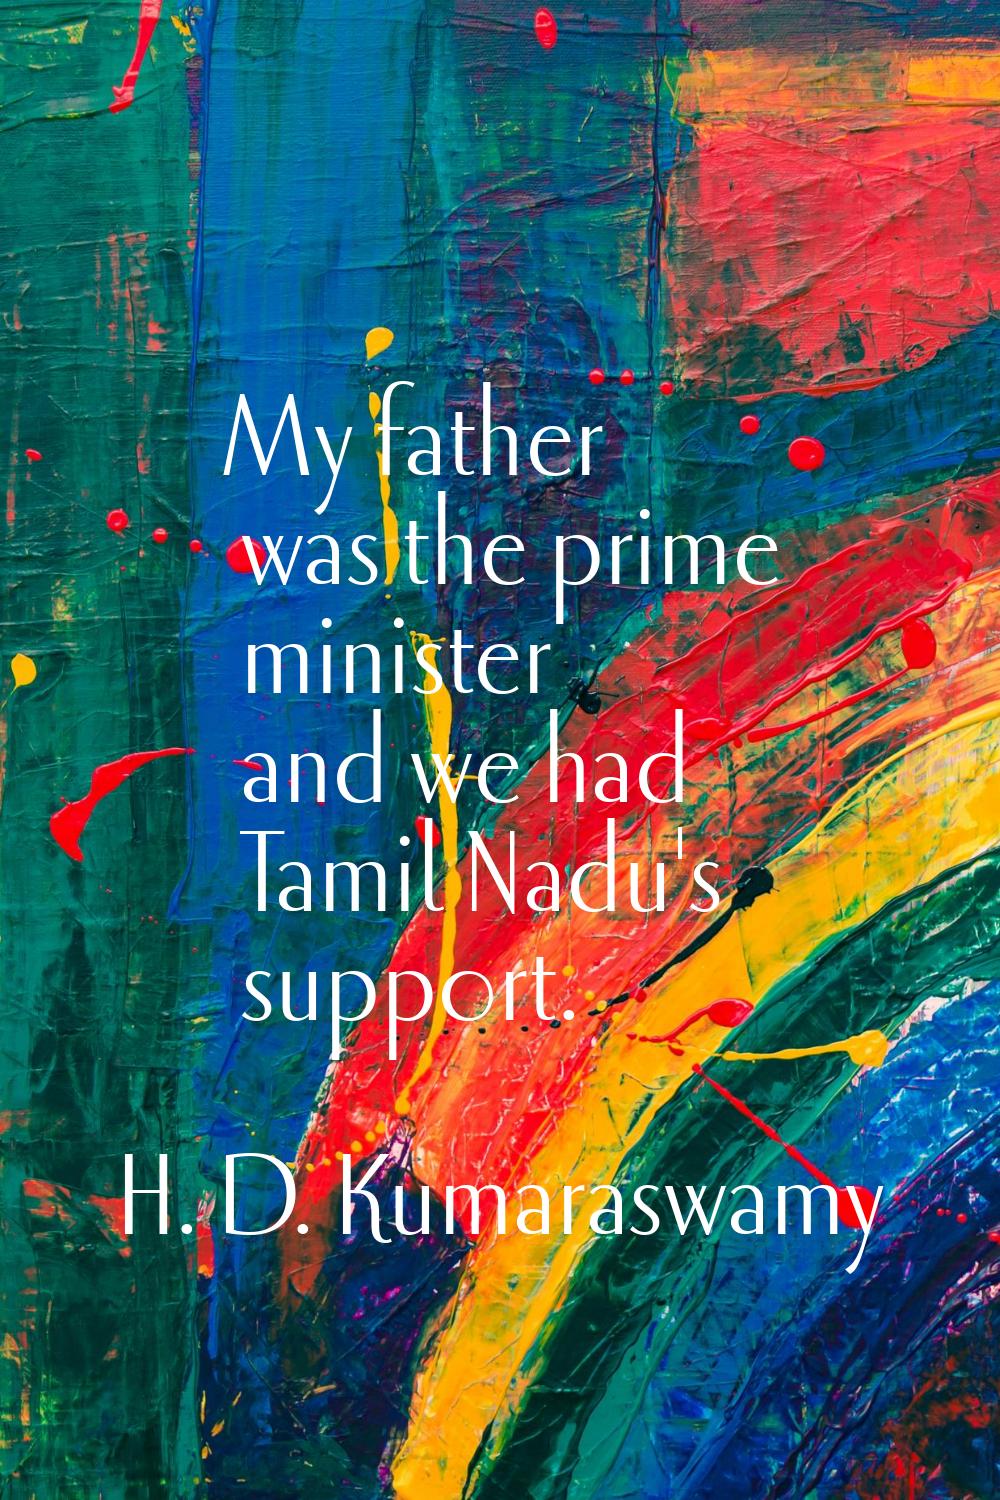 My father was the prime minister and we had Tamil Nadu's support.